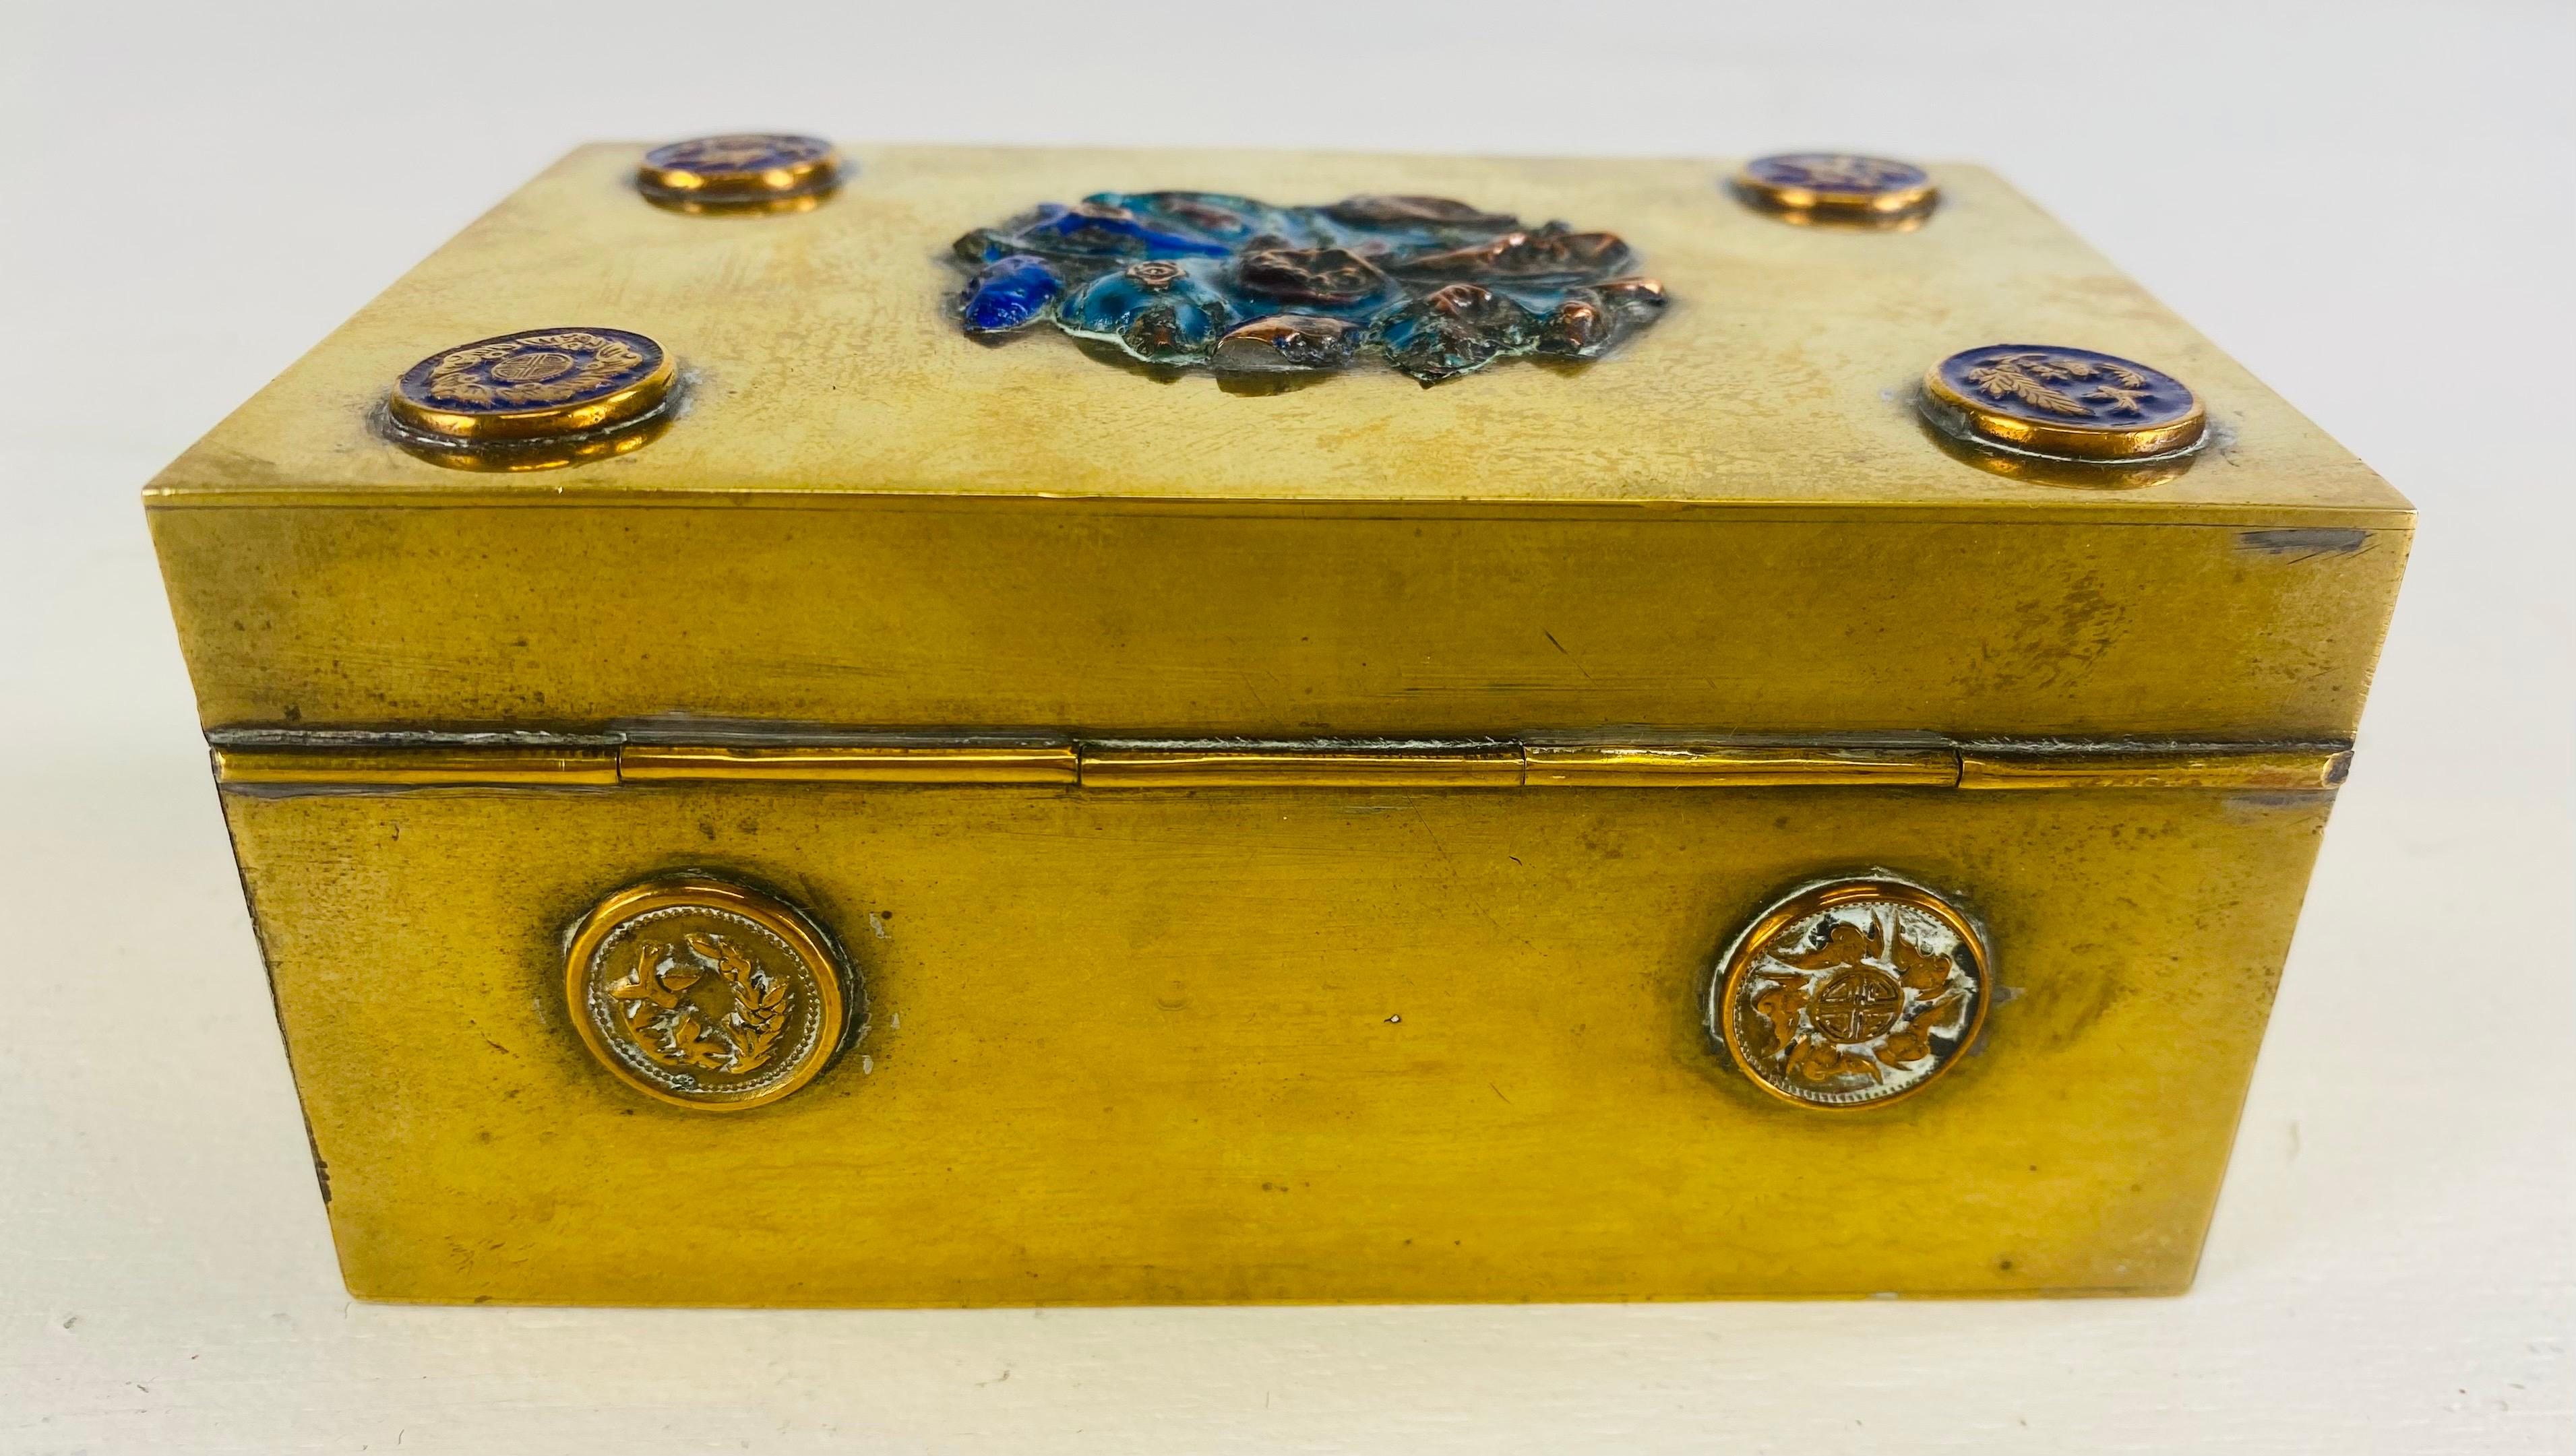 Chinese Export Vintage solid brass and enamel Chinese export trinket box. For Sale